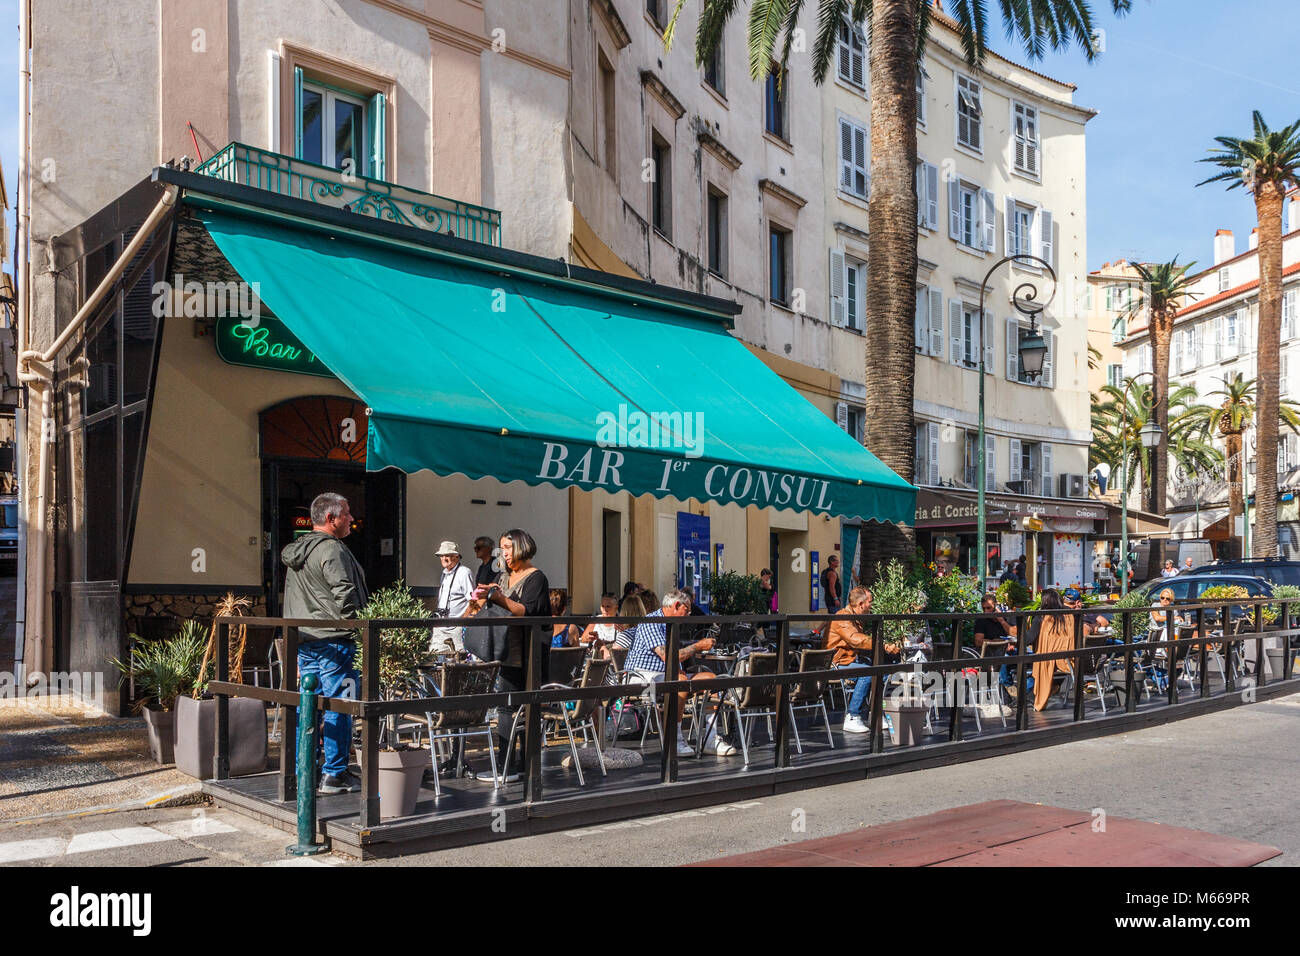 People outside a bar in Ajaccia, Corsica, France Stock Photo